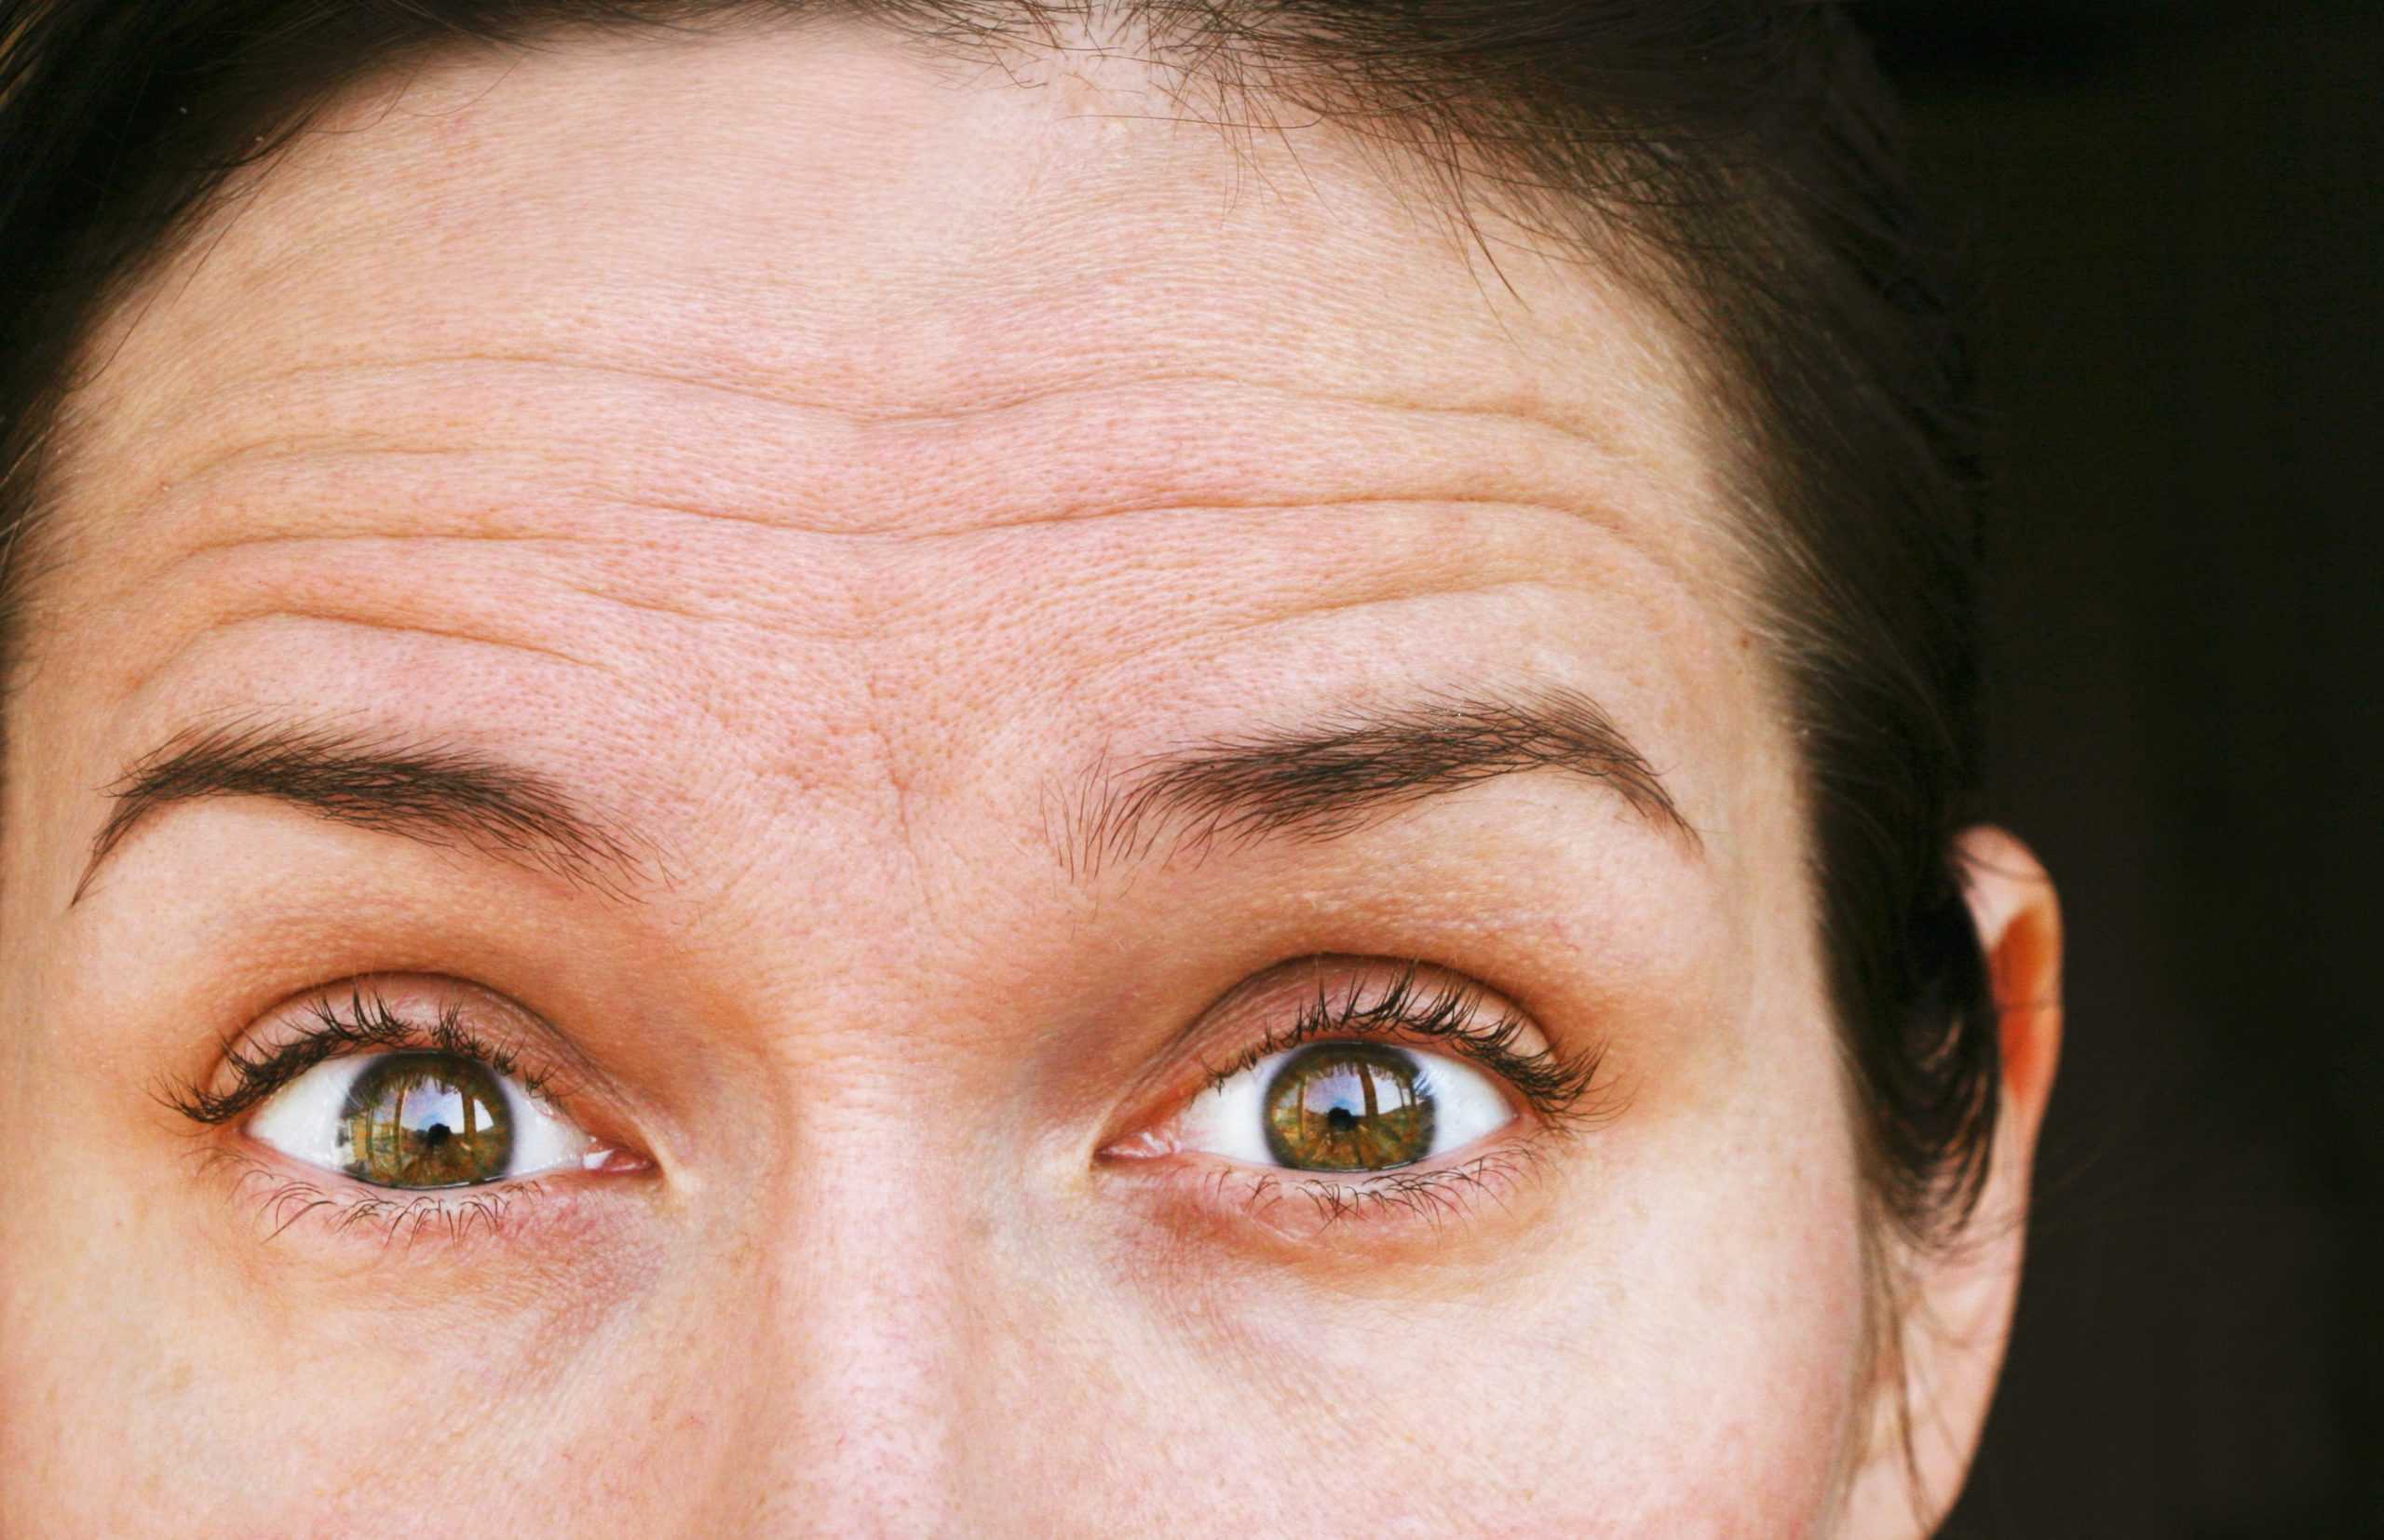 How Does Botox Work for Wrinkles